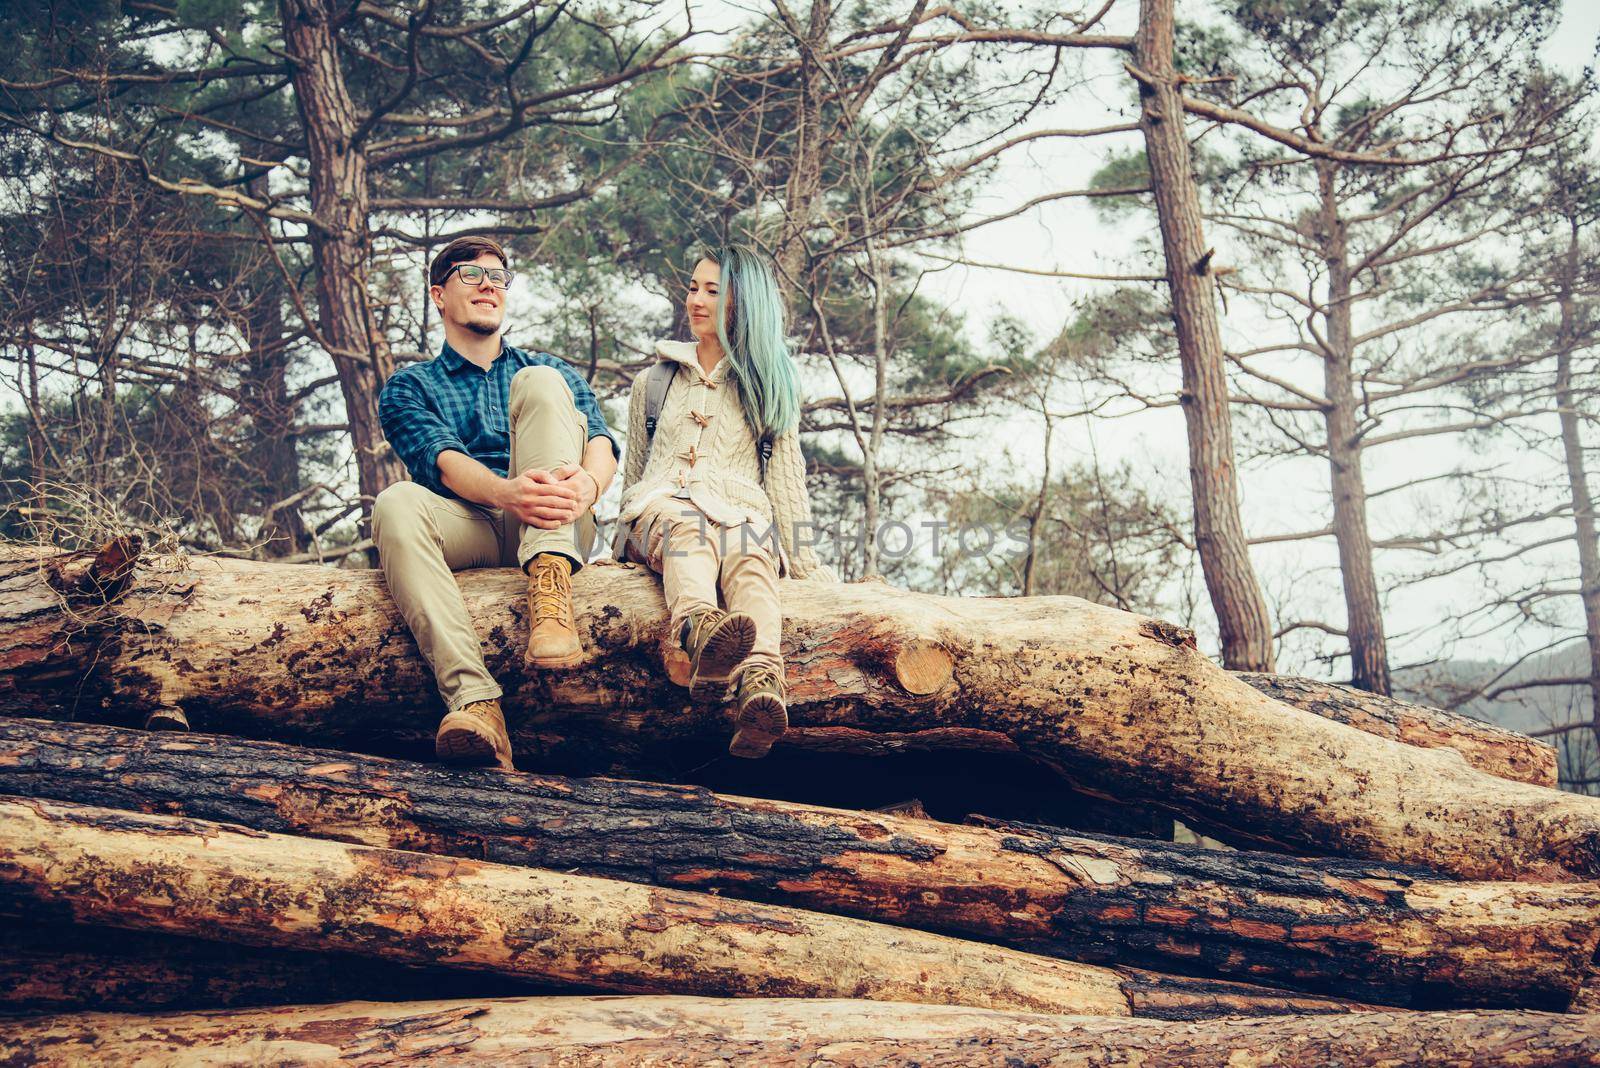 Loving couple sitting on fallen tree trunk in the forest. Traveler couple resting outdoor